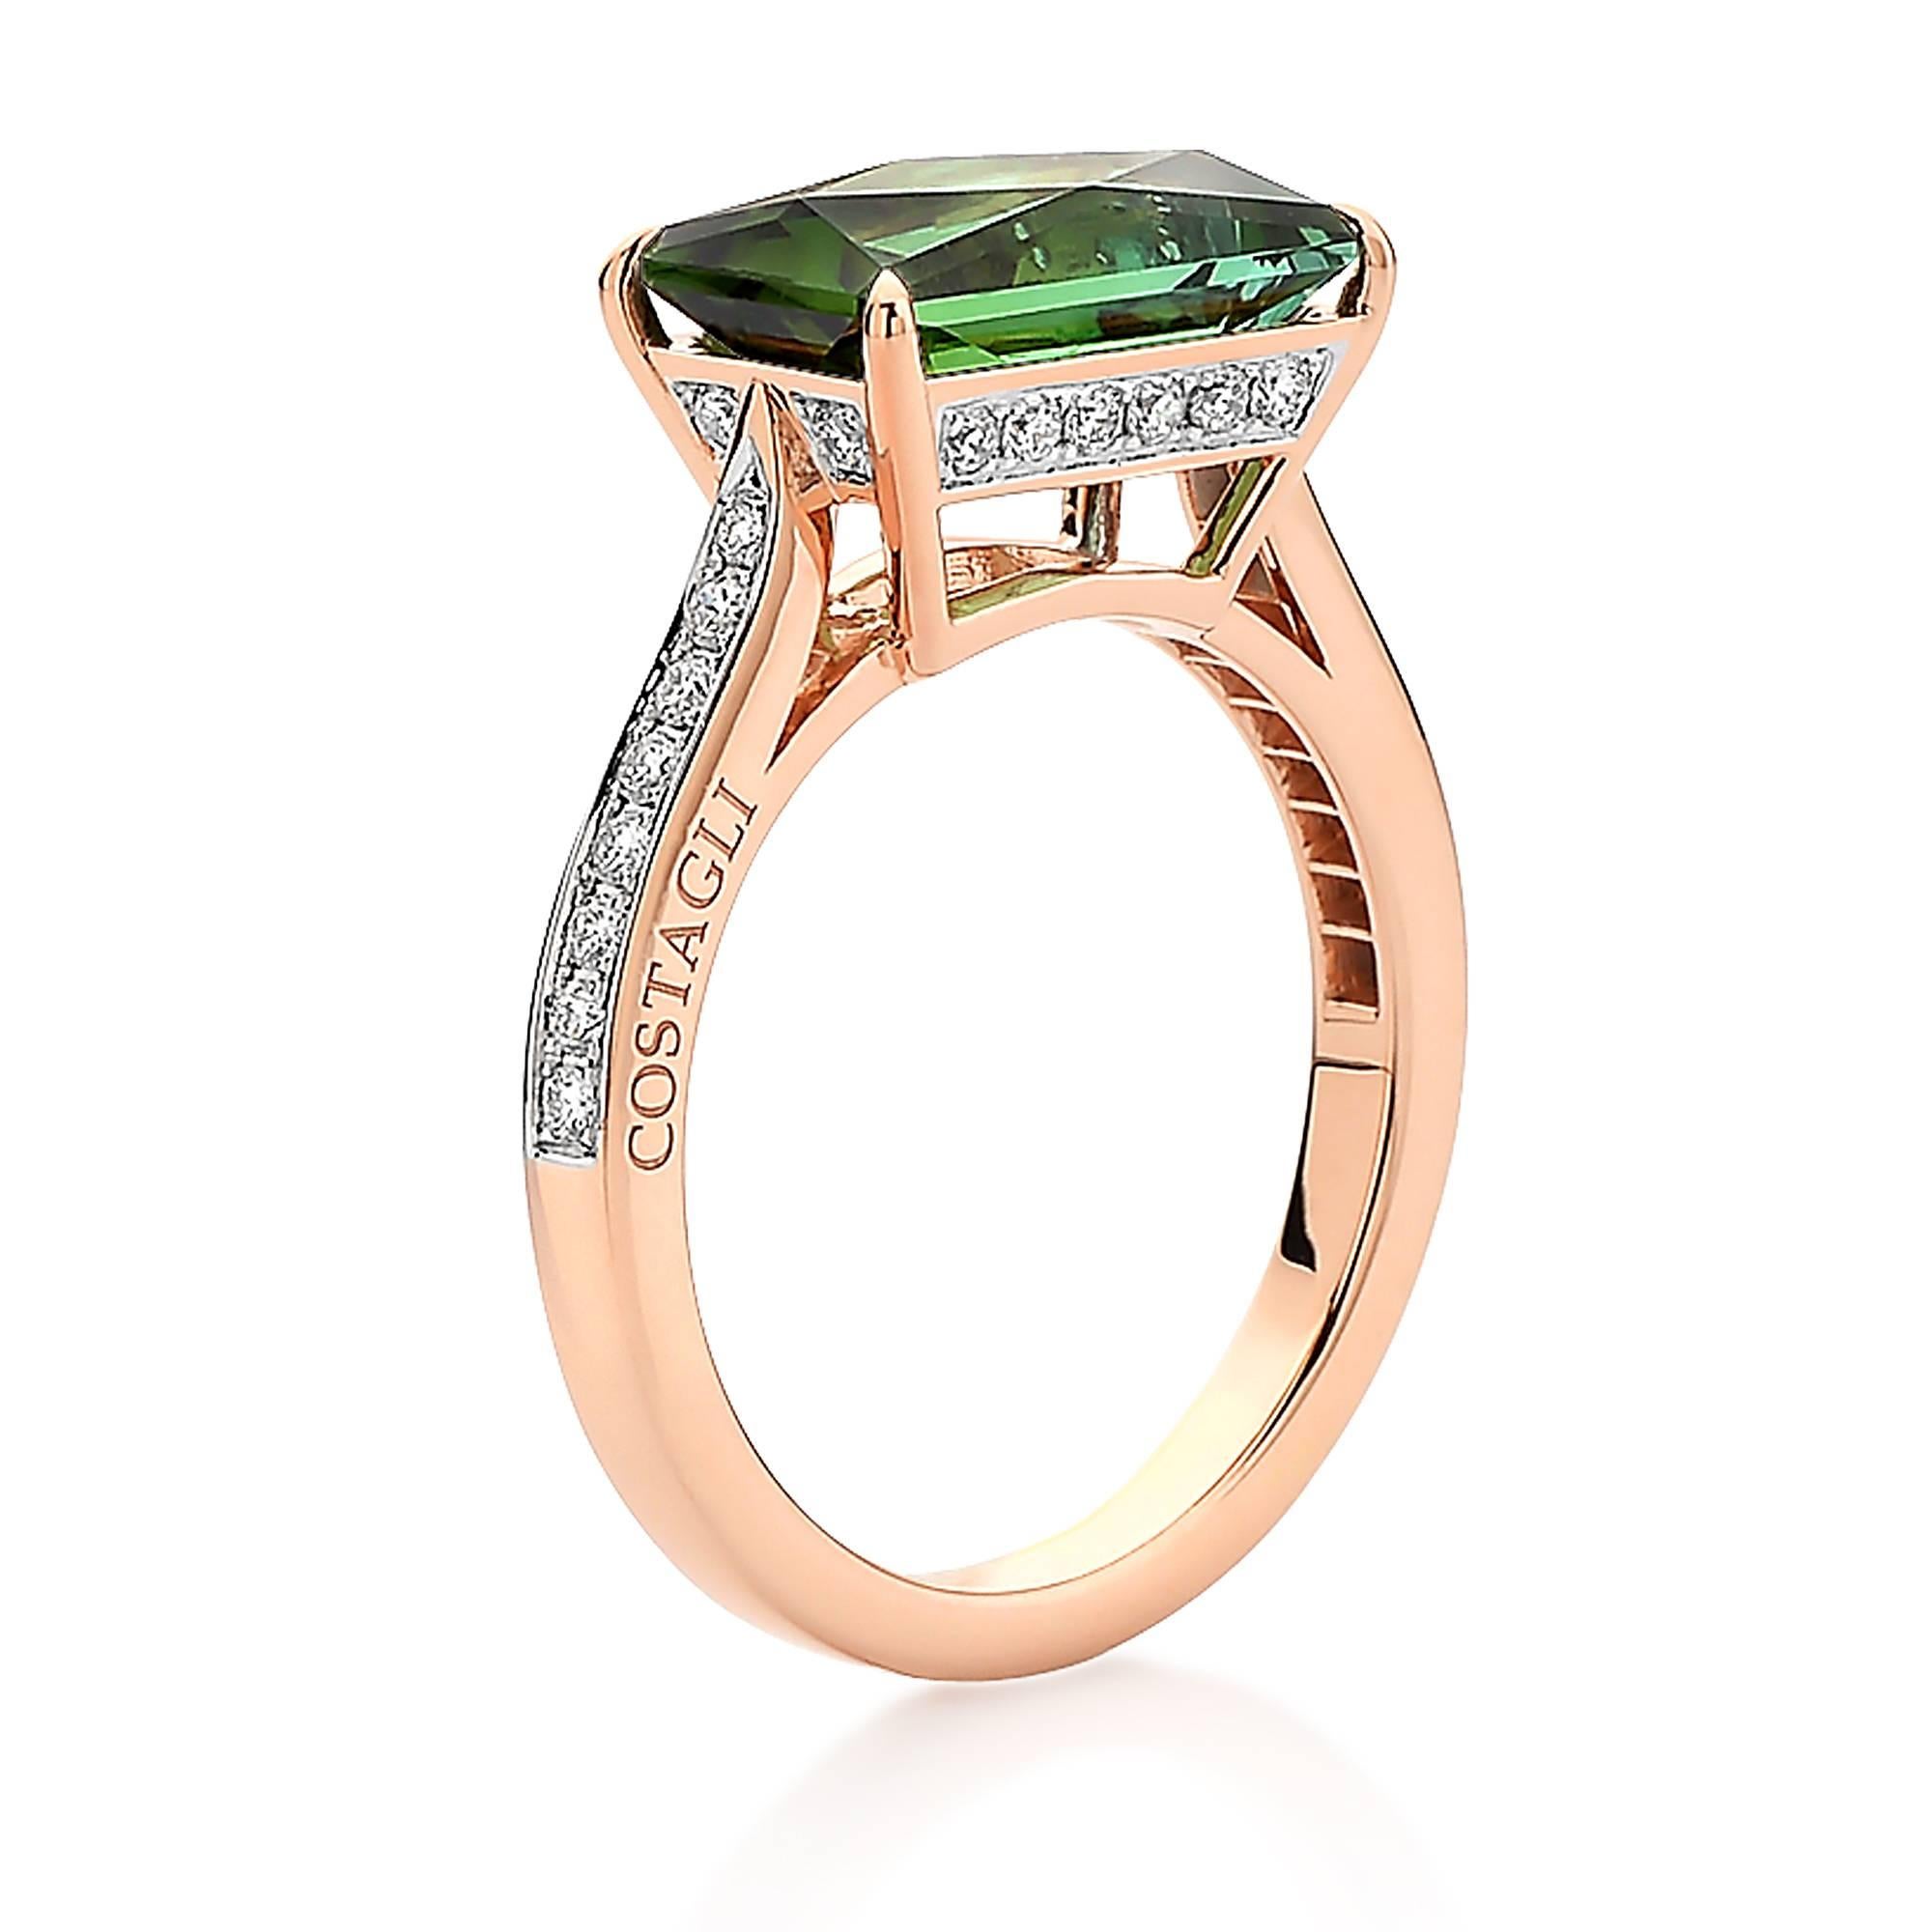 One of a kind emerald cut green tourmaline 3.65 carat ring set in 18kt rose gold with pave-set round, brilliant diamonds, 0.30 carats.

Perfect as a non-diamond engagement ring, as well as an everyday jeans and t-shirt ring, this 18kt rose gold ring